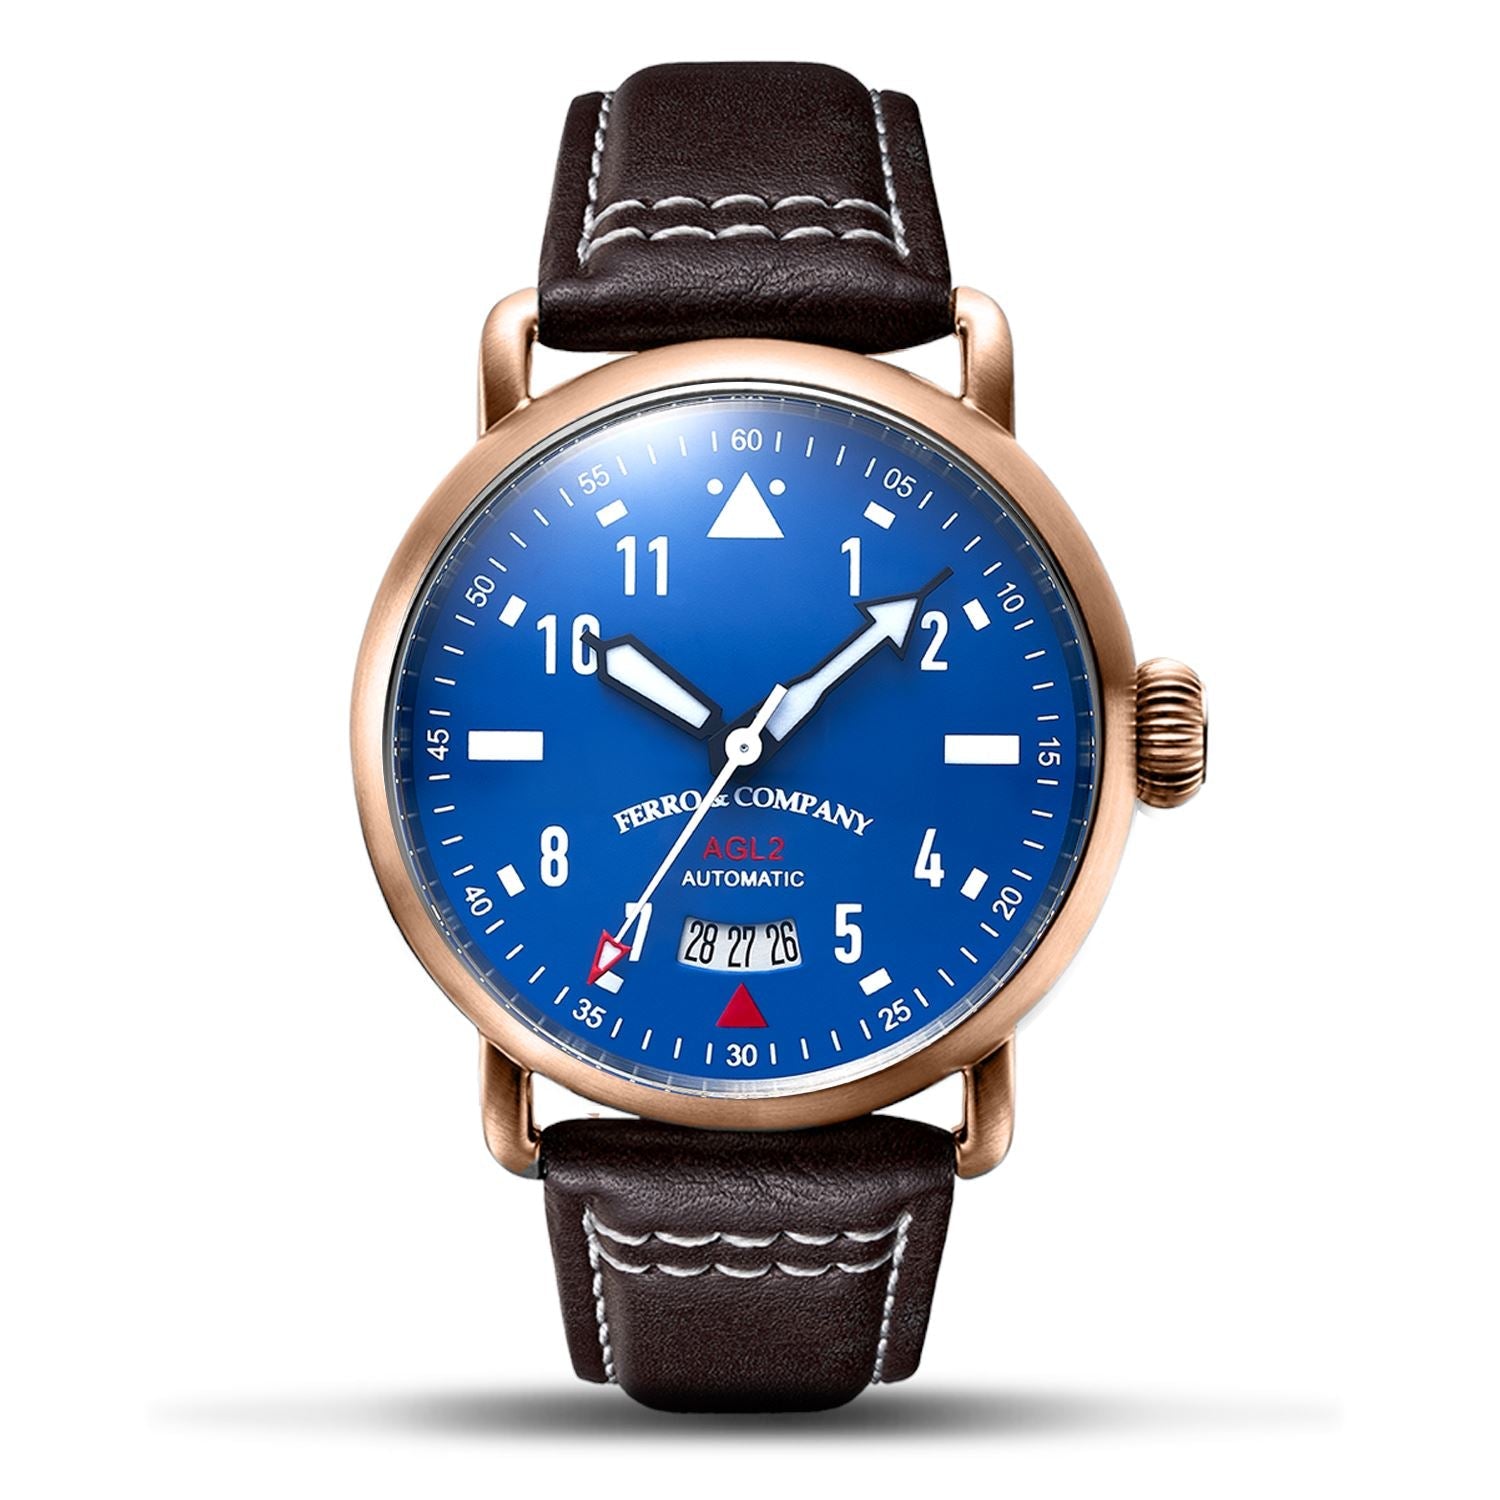 Ferro Watches AGL 2 Vintage style Pilot Watch Blue Rose Gold - Ferro &amp; Company Watches